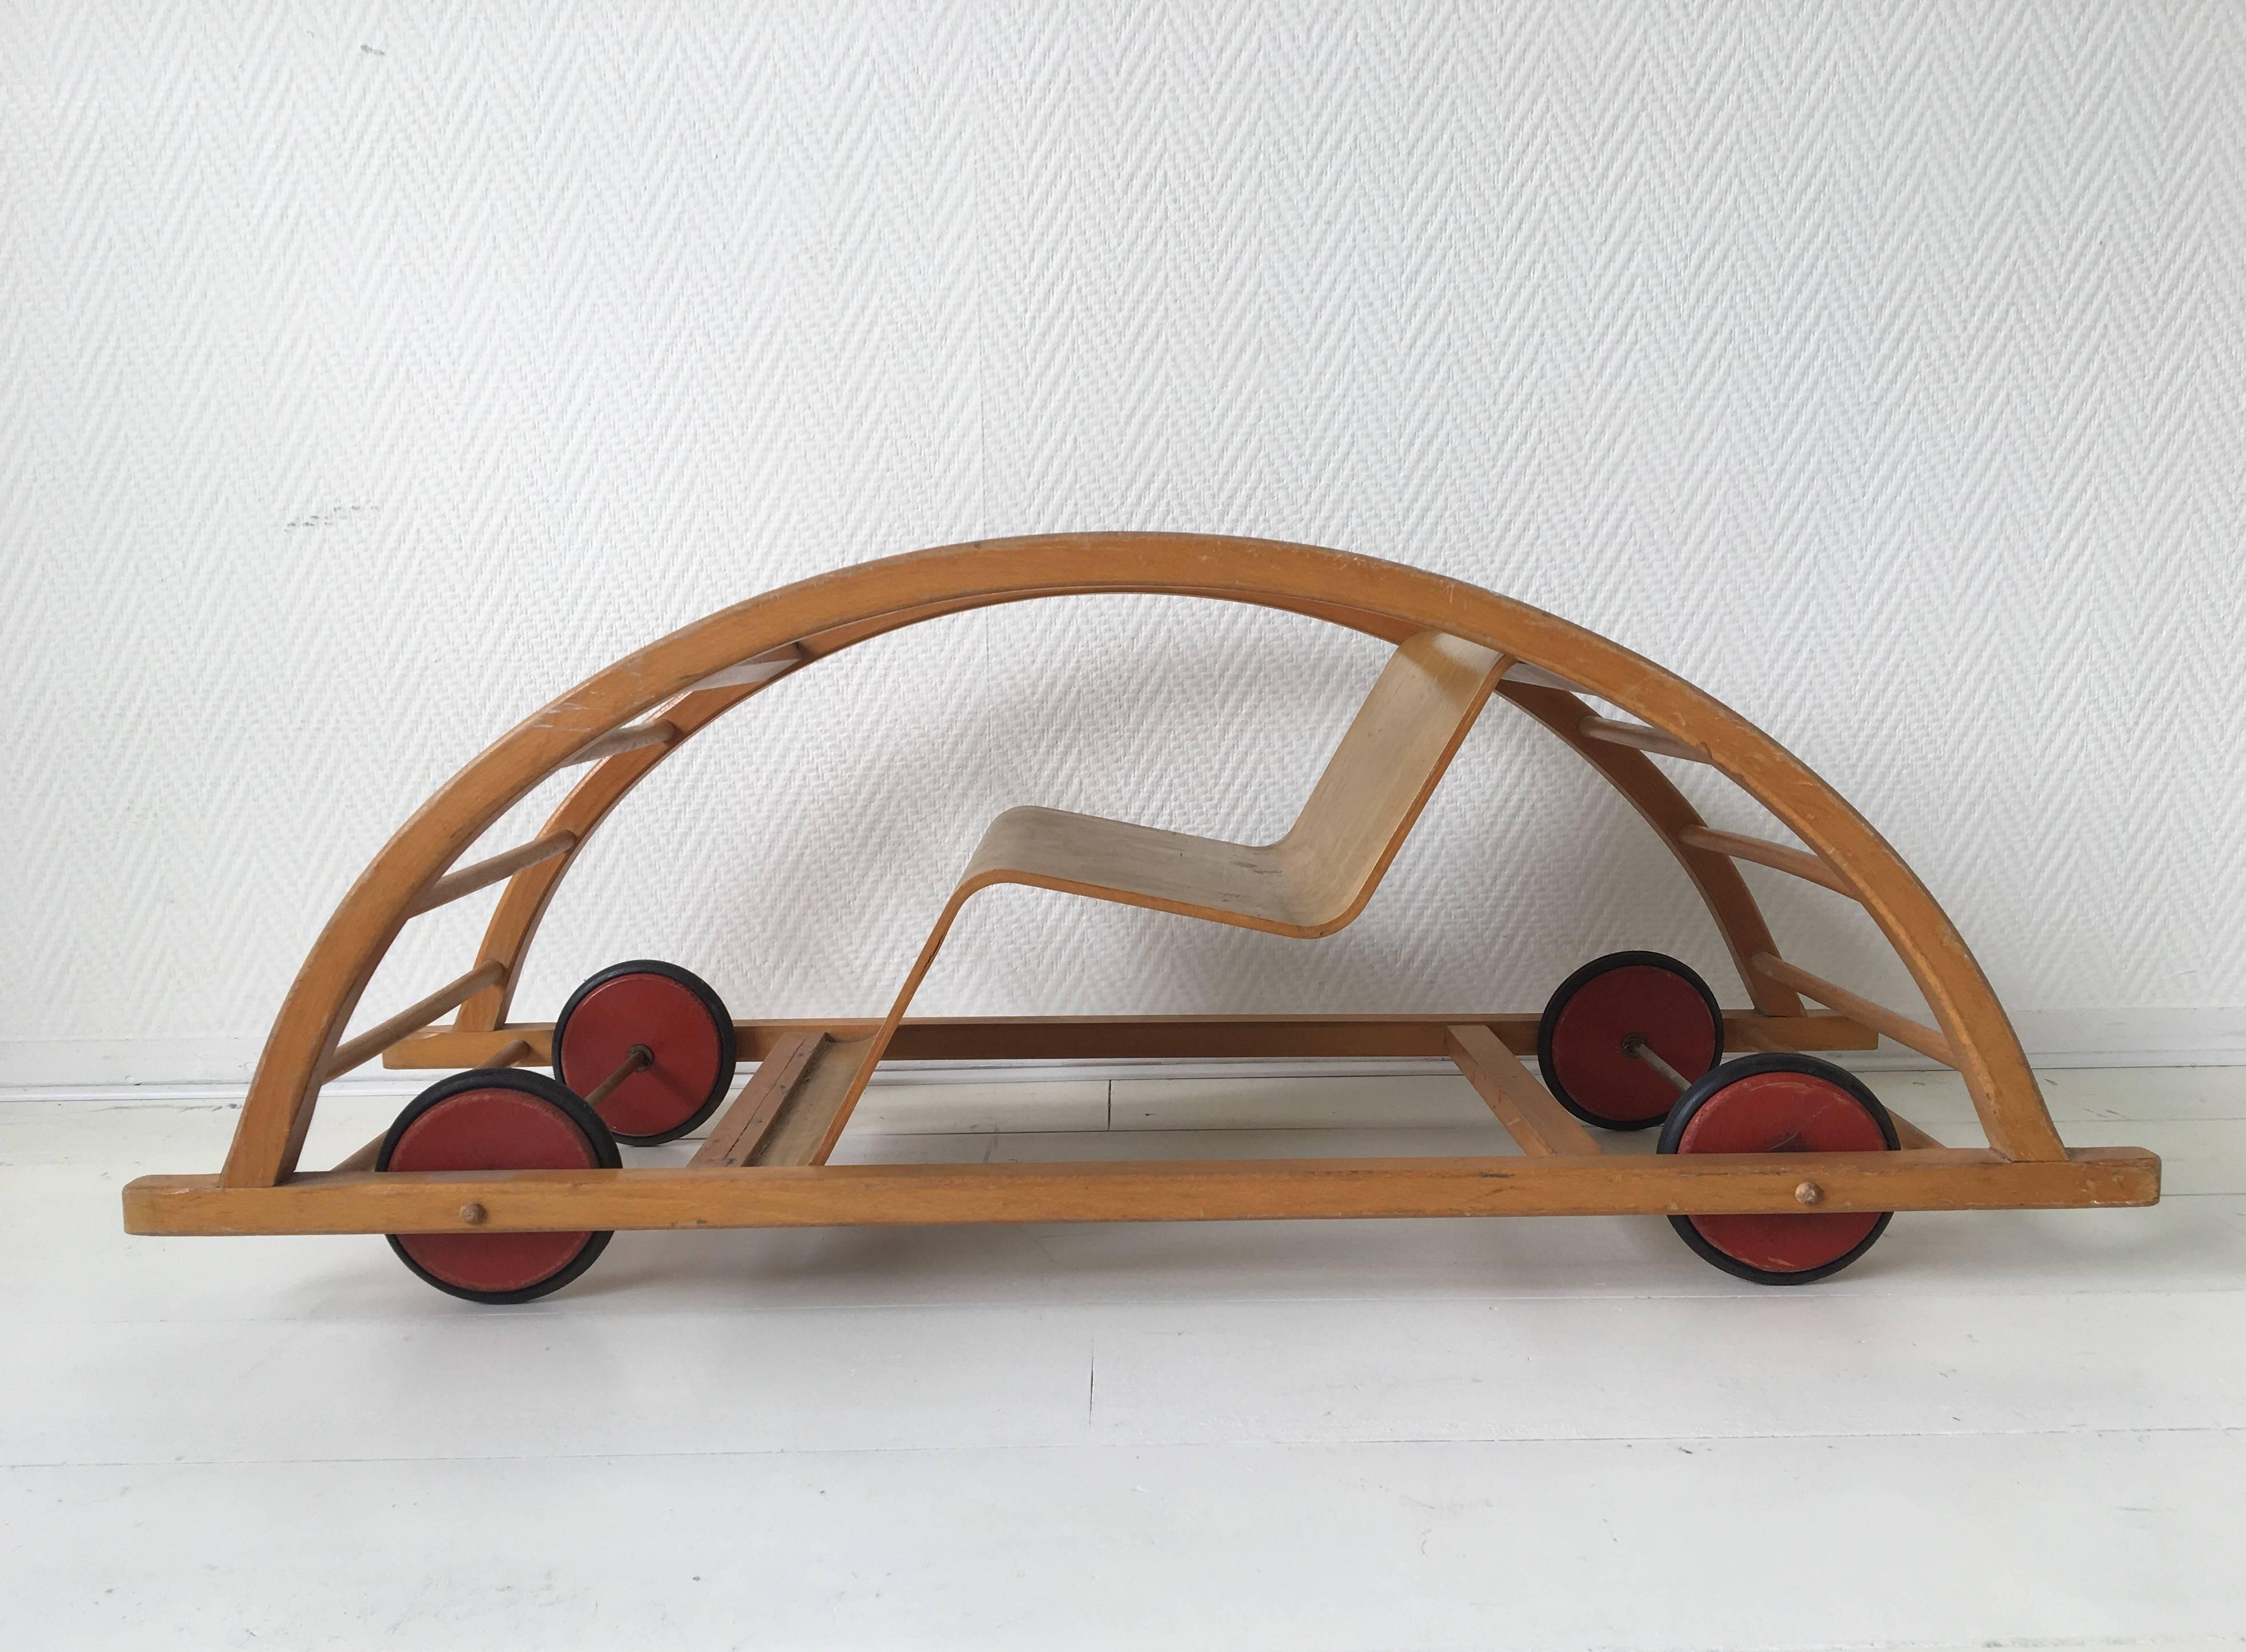 It's a kind of magic, you would think when you see this child's car turn into a rocking chair, well no but a very well designed piece of child's furniture it sure is!

This piece was designed by Hans Brockhage and produced by Siegried Lenz in the